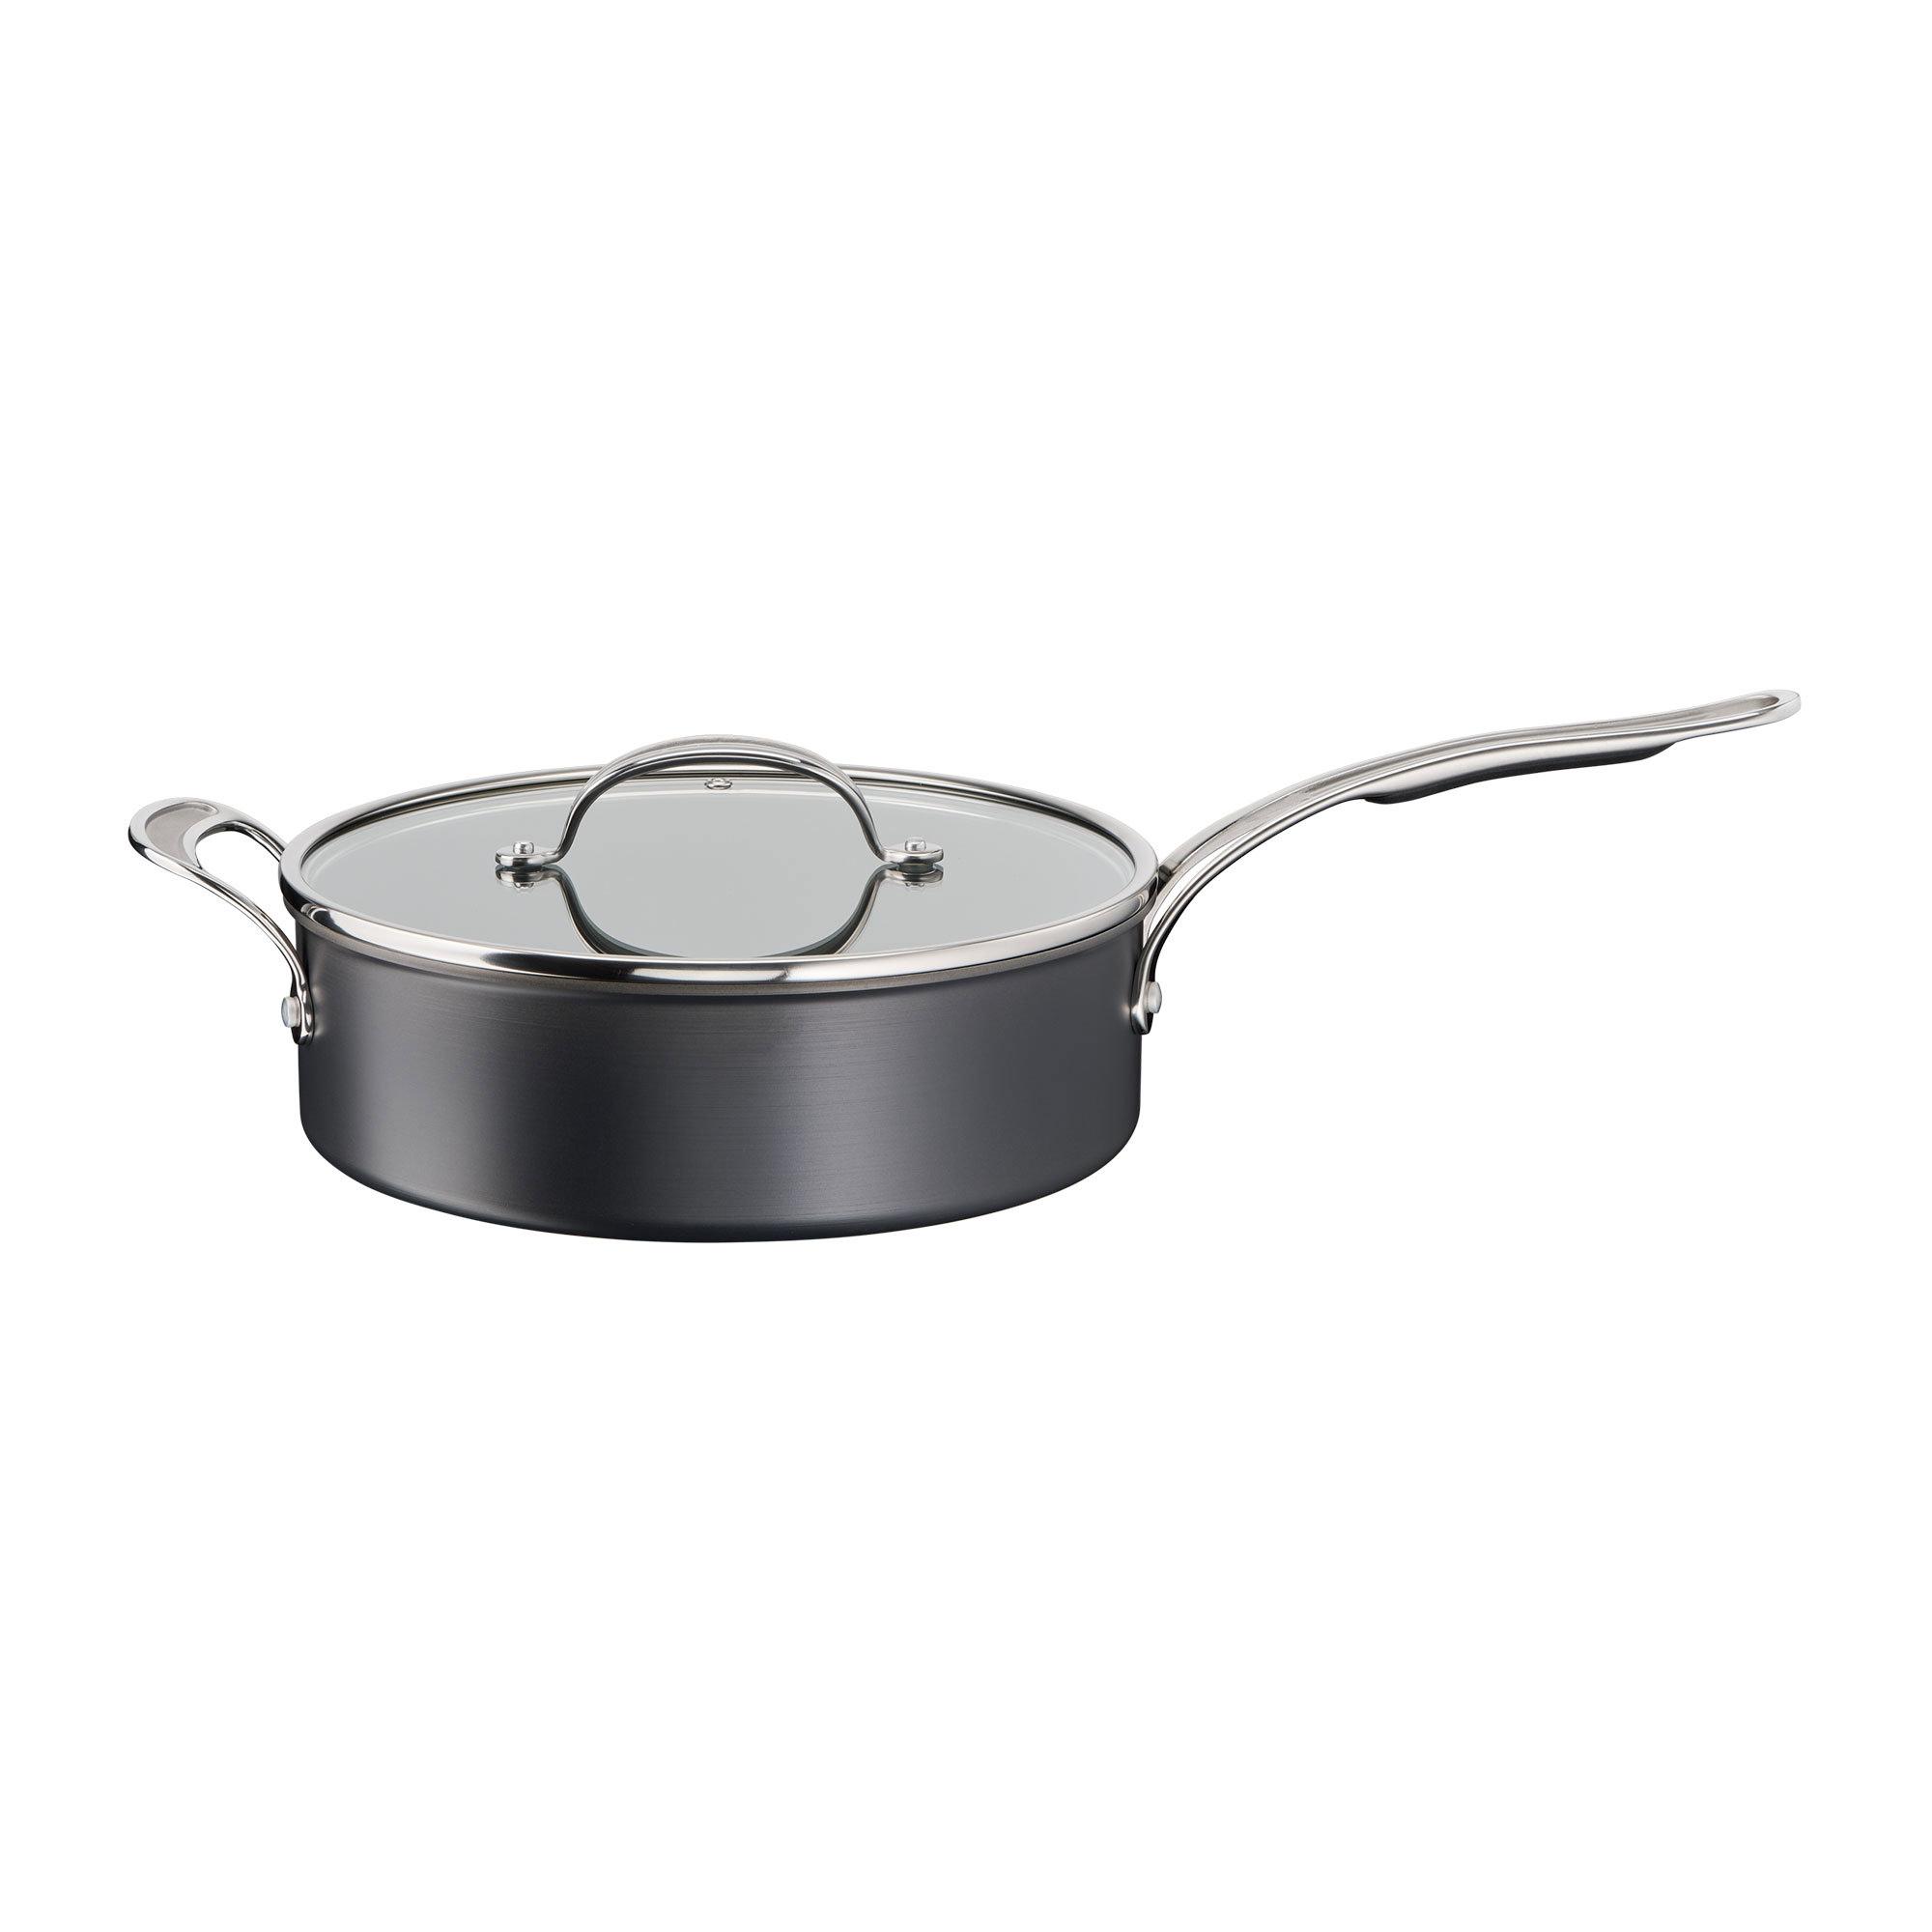 Jamie Oliver by Tefal Cook's Classic Hard Anodised Induction Saute Pan 26cm Image 3